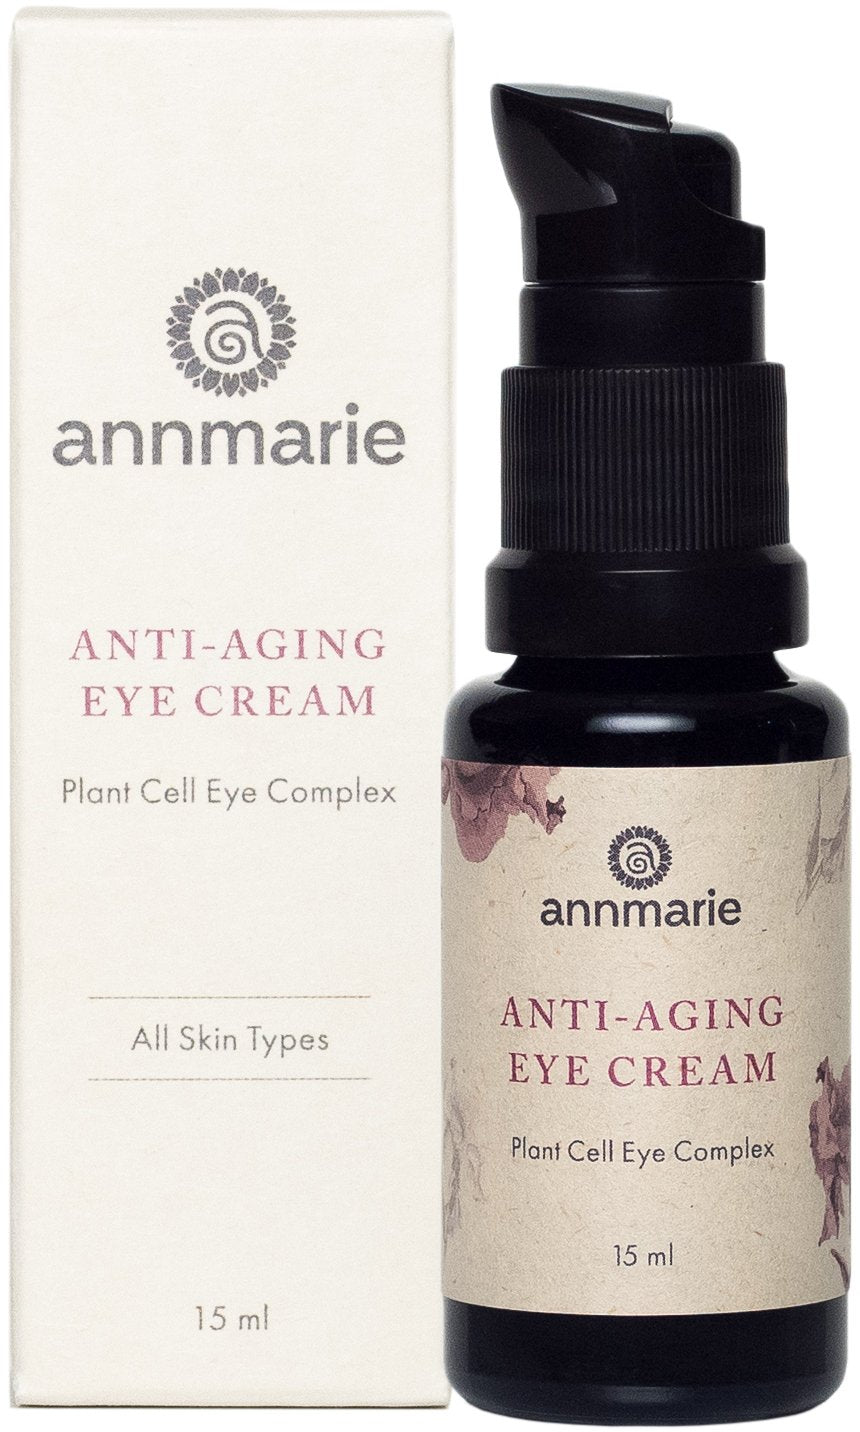 Annmarie Skin Care Anti-Aging Eye Cream - With Antioxidant-Rich Green Tea, Eyebright & Cucumber Extract, Soothing for Puffiness, Fine Lines and Wrinkles, All Skin Types (15ml, 0.5  )